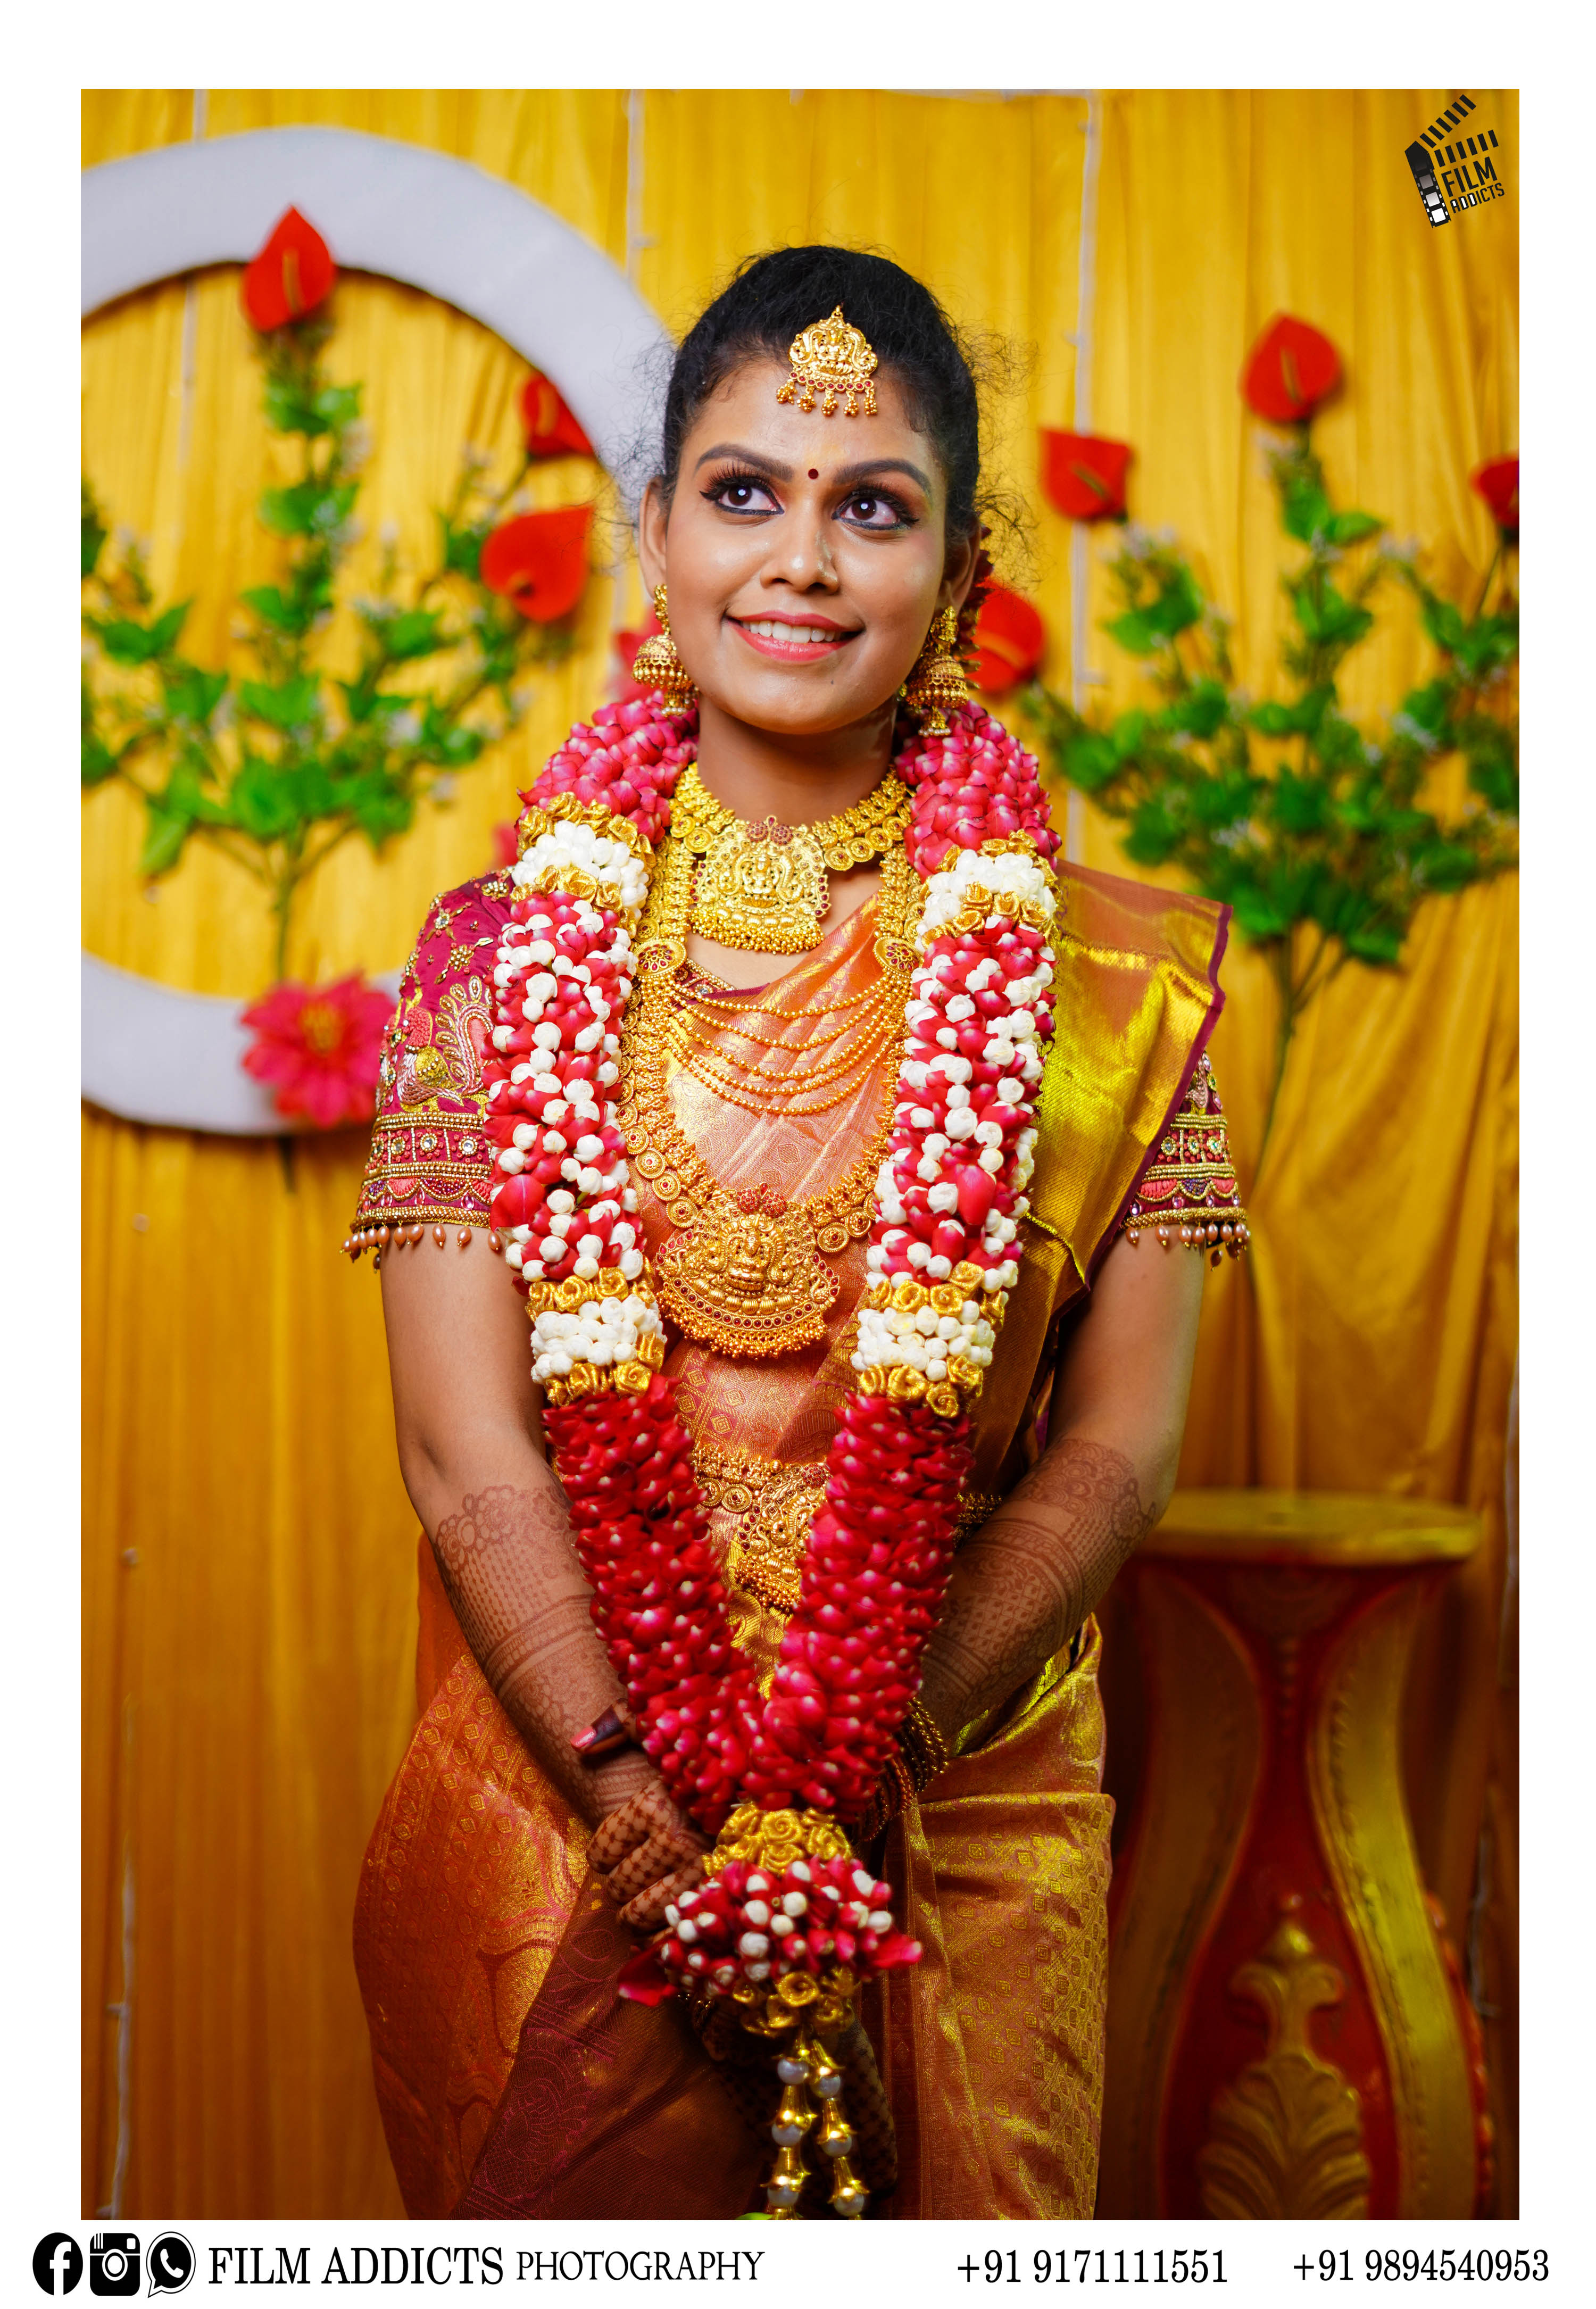 Best Puberty Photography in Thanjavur-FilmAddicts Photography,best Wedding photographers in Thanjavur,best candid photographers in Thanjavur,best Wedding photography in Thanjavur,best candid photography in Thanjavur, Best Wedding candid Photographers in Thanjavur, best marriage photographers in Thanjavur,best marriage photography in Thanjavur,best photographers in Thanjavur,best photography in Thanjavur,best Wedding candid photography in Thanjavur,best Wedding video in Thanjavur,best Wedding videographers in Thanjavur,best Wedding videography in Thanjavur,best candid videographers in Thanjavur,best candid videography in Thanjavur,best marriage videographers in Thanjavur,best marriage videography in Thanjavur,best videographers in Thanjavur,best videography in Thanjavur,best Wedding candid videography in Thanjavur,best Wedding candid videographers in Thanjavur,best helicam operators in Thanjavur,best drone operators in Thanjavur,best Wedding studio in Thanjavur,best professional photographers in Thanjavur,best professional photography in Thanjavur,No.1 Wedding photographers in Thanjavur,No.1 Wedding photography in Thanjavur,Thanjavur Wedding photographers,Thanjavur Wedding photography,Thanjavur Wedding videos,best candid videos in Thanjavur,best candid photos in Thanjavur,best helicam operators photography in Thanjavur,best helicam operator photographers in Thanjavur,best Wedding videography in Thanjavur.